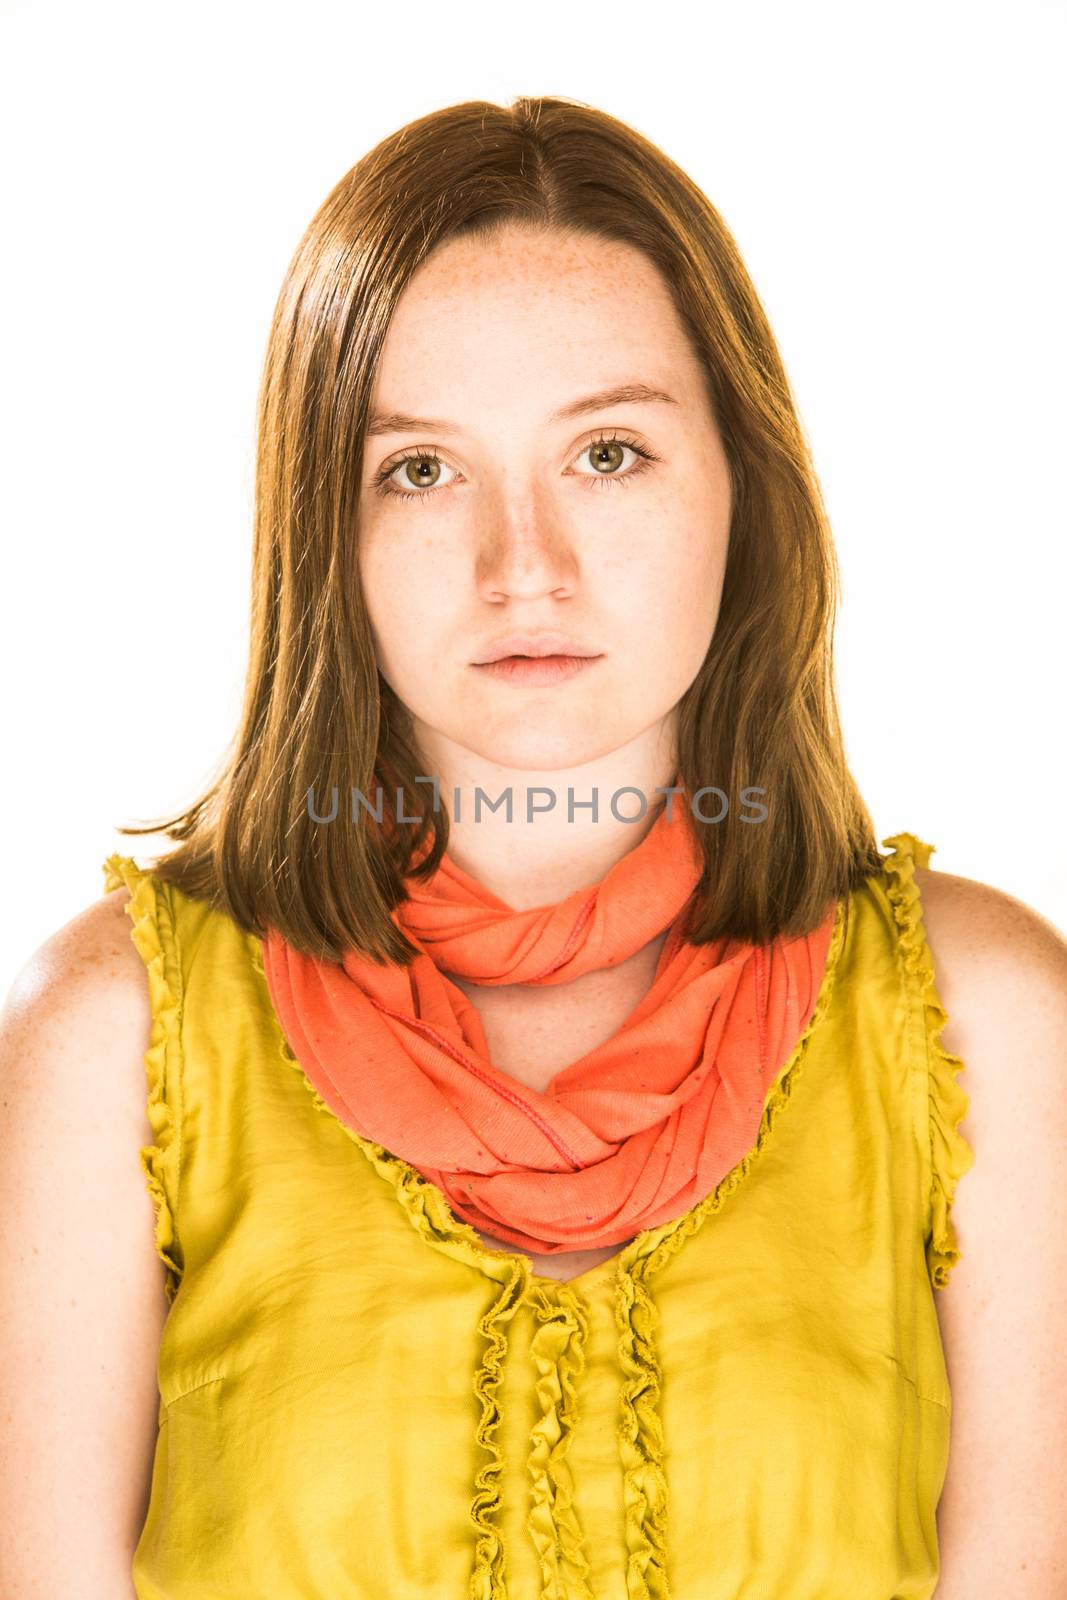 Pretty girl with a deadpan expression on white background